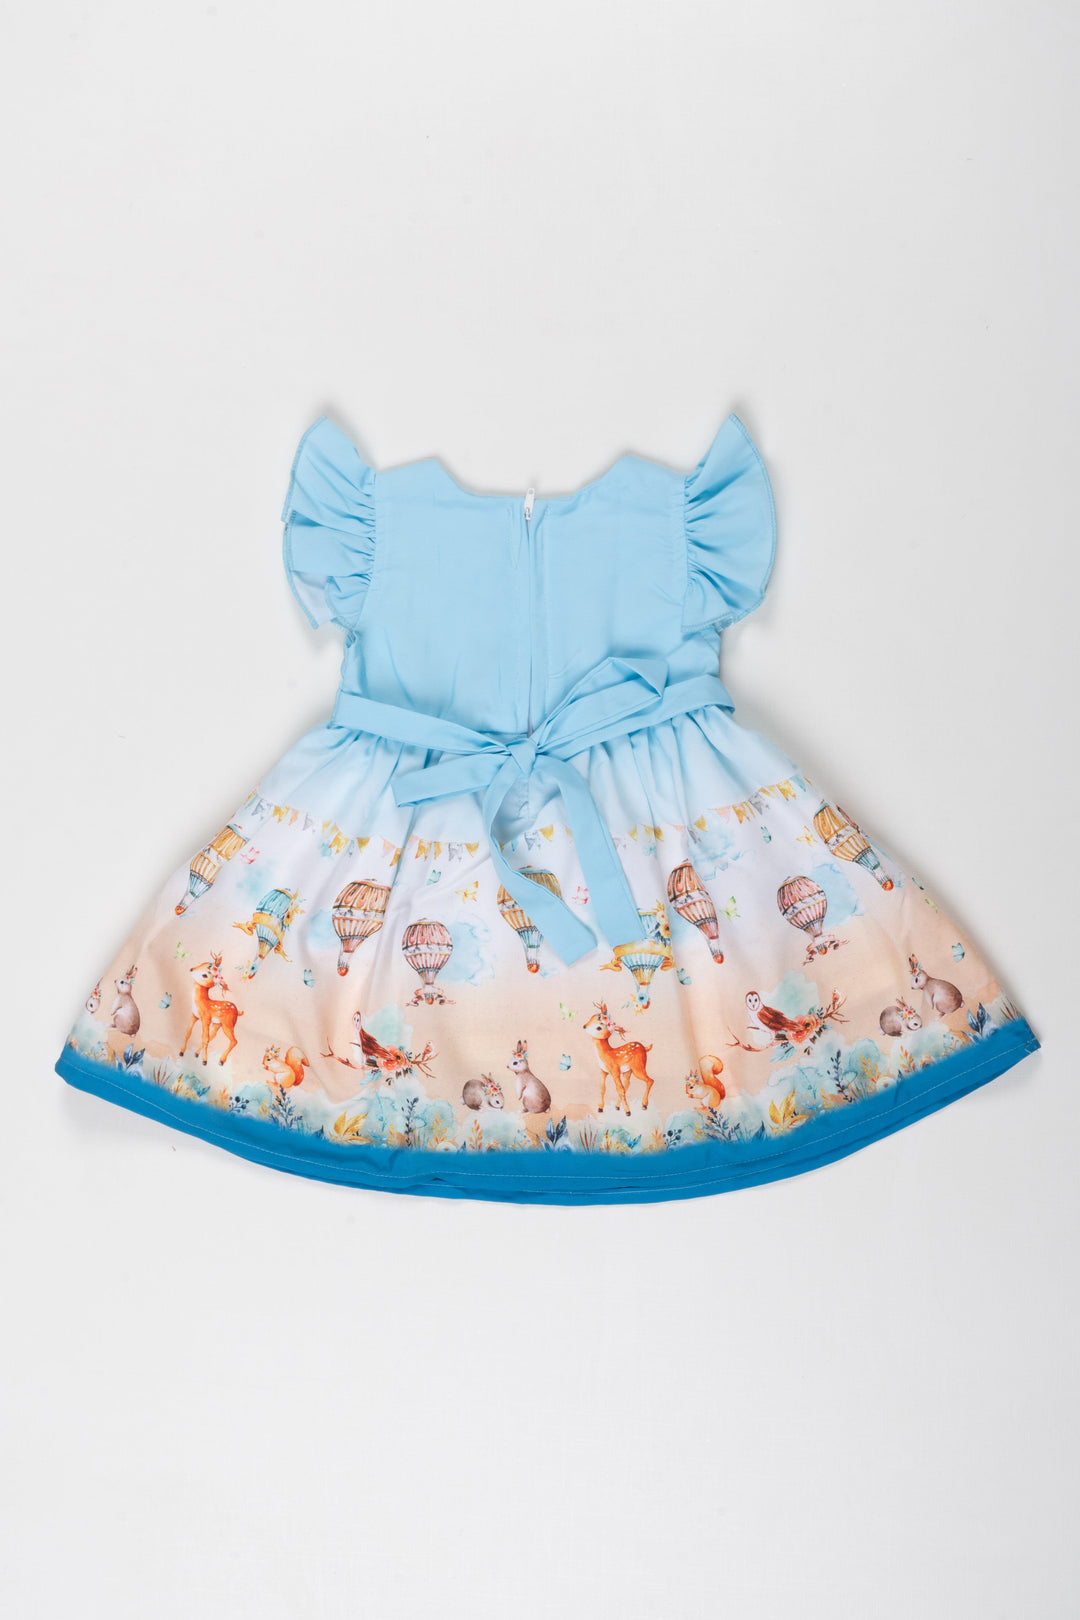 The Nesavu Baby Fancy Frock Sky Adventure Baby Girl Frock with Whimsical Woodland Print Nesavu Embark on Whimsical Journeys with Our Sky Blue Woodland Baby Frock | The Nesavu